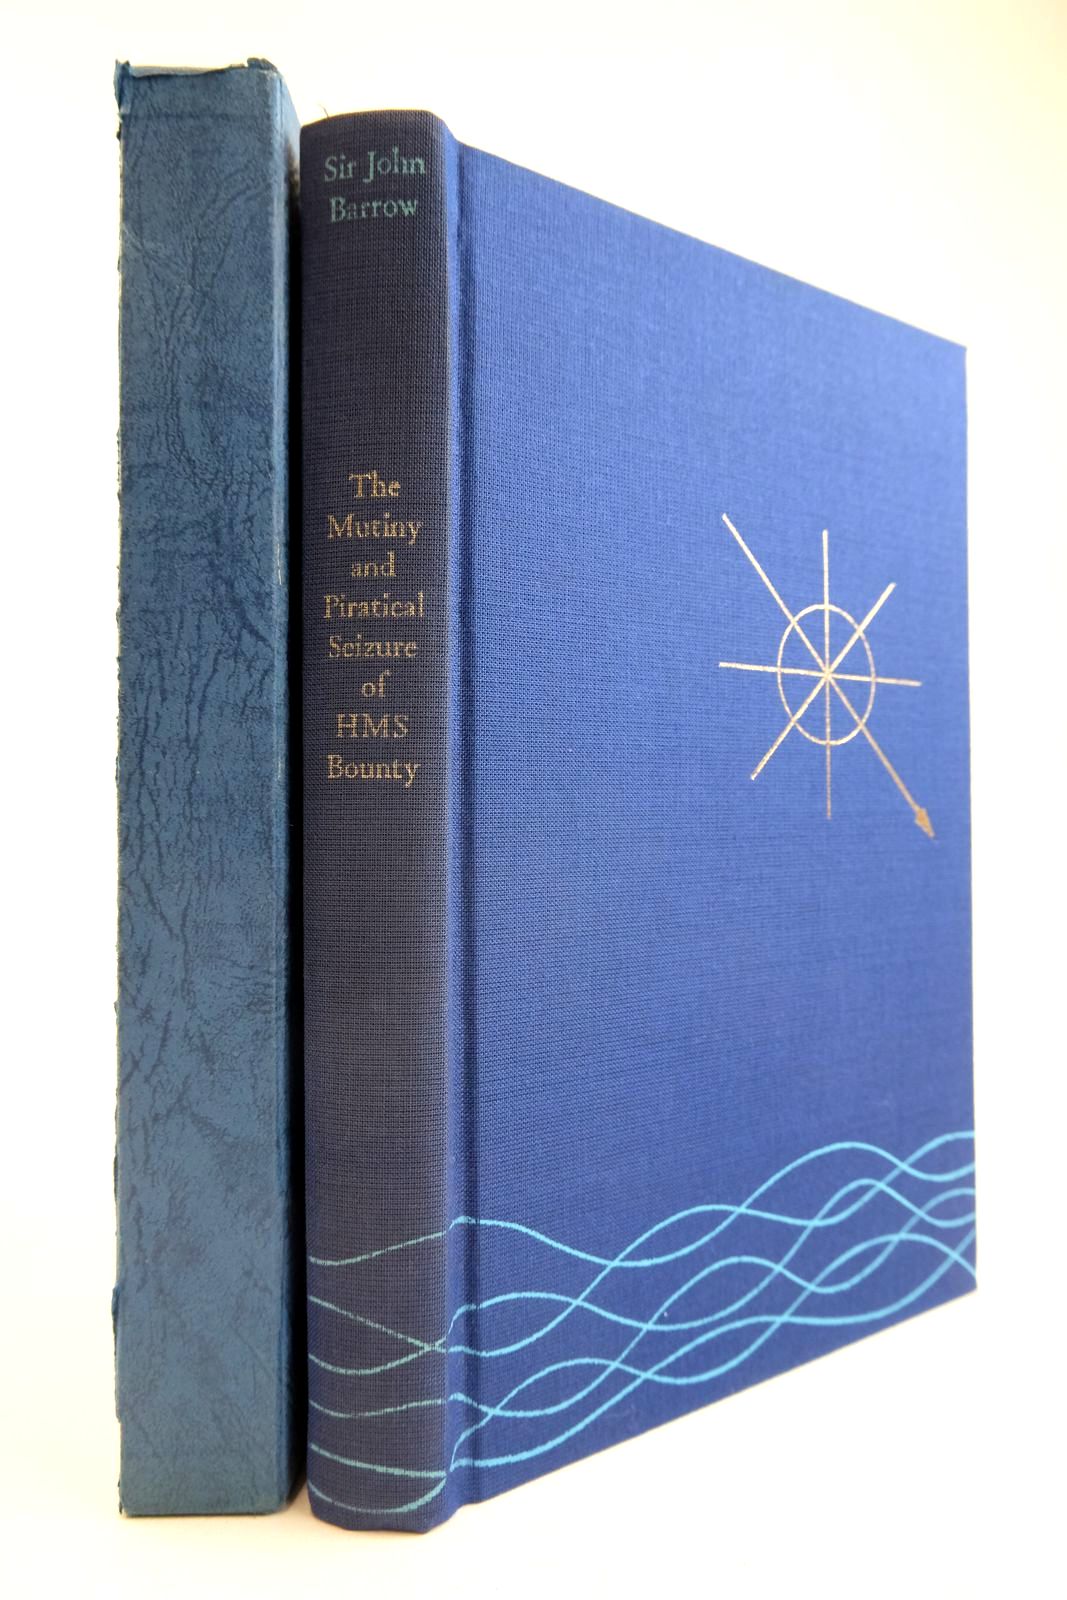 Photo of THE EVENTFUL HISTORY OF THE MUTINY AND PIRATICAL SEIZURE OF HMS BOUNTY ITS CAUSES AND CONSEQUENCES written by Barrow, John Roskill, Stephen W. published by Folio Society (STOCK CODE: 2134241)  for sale by Stella & Rose's Books